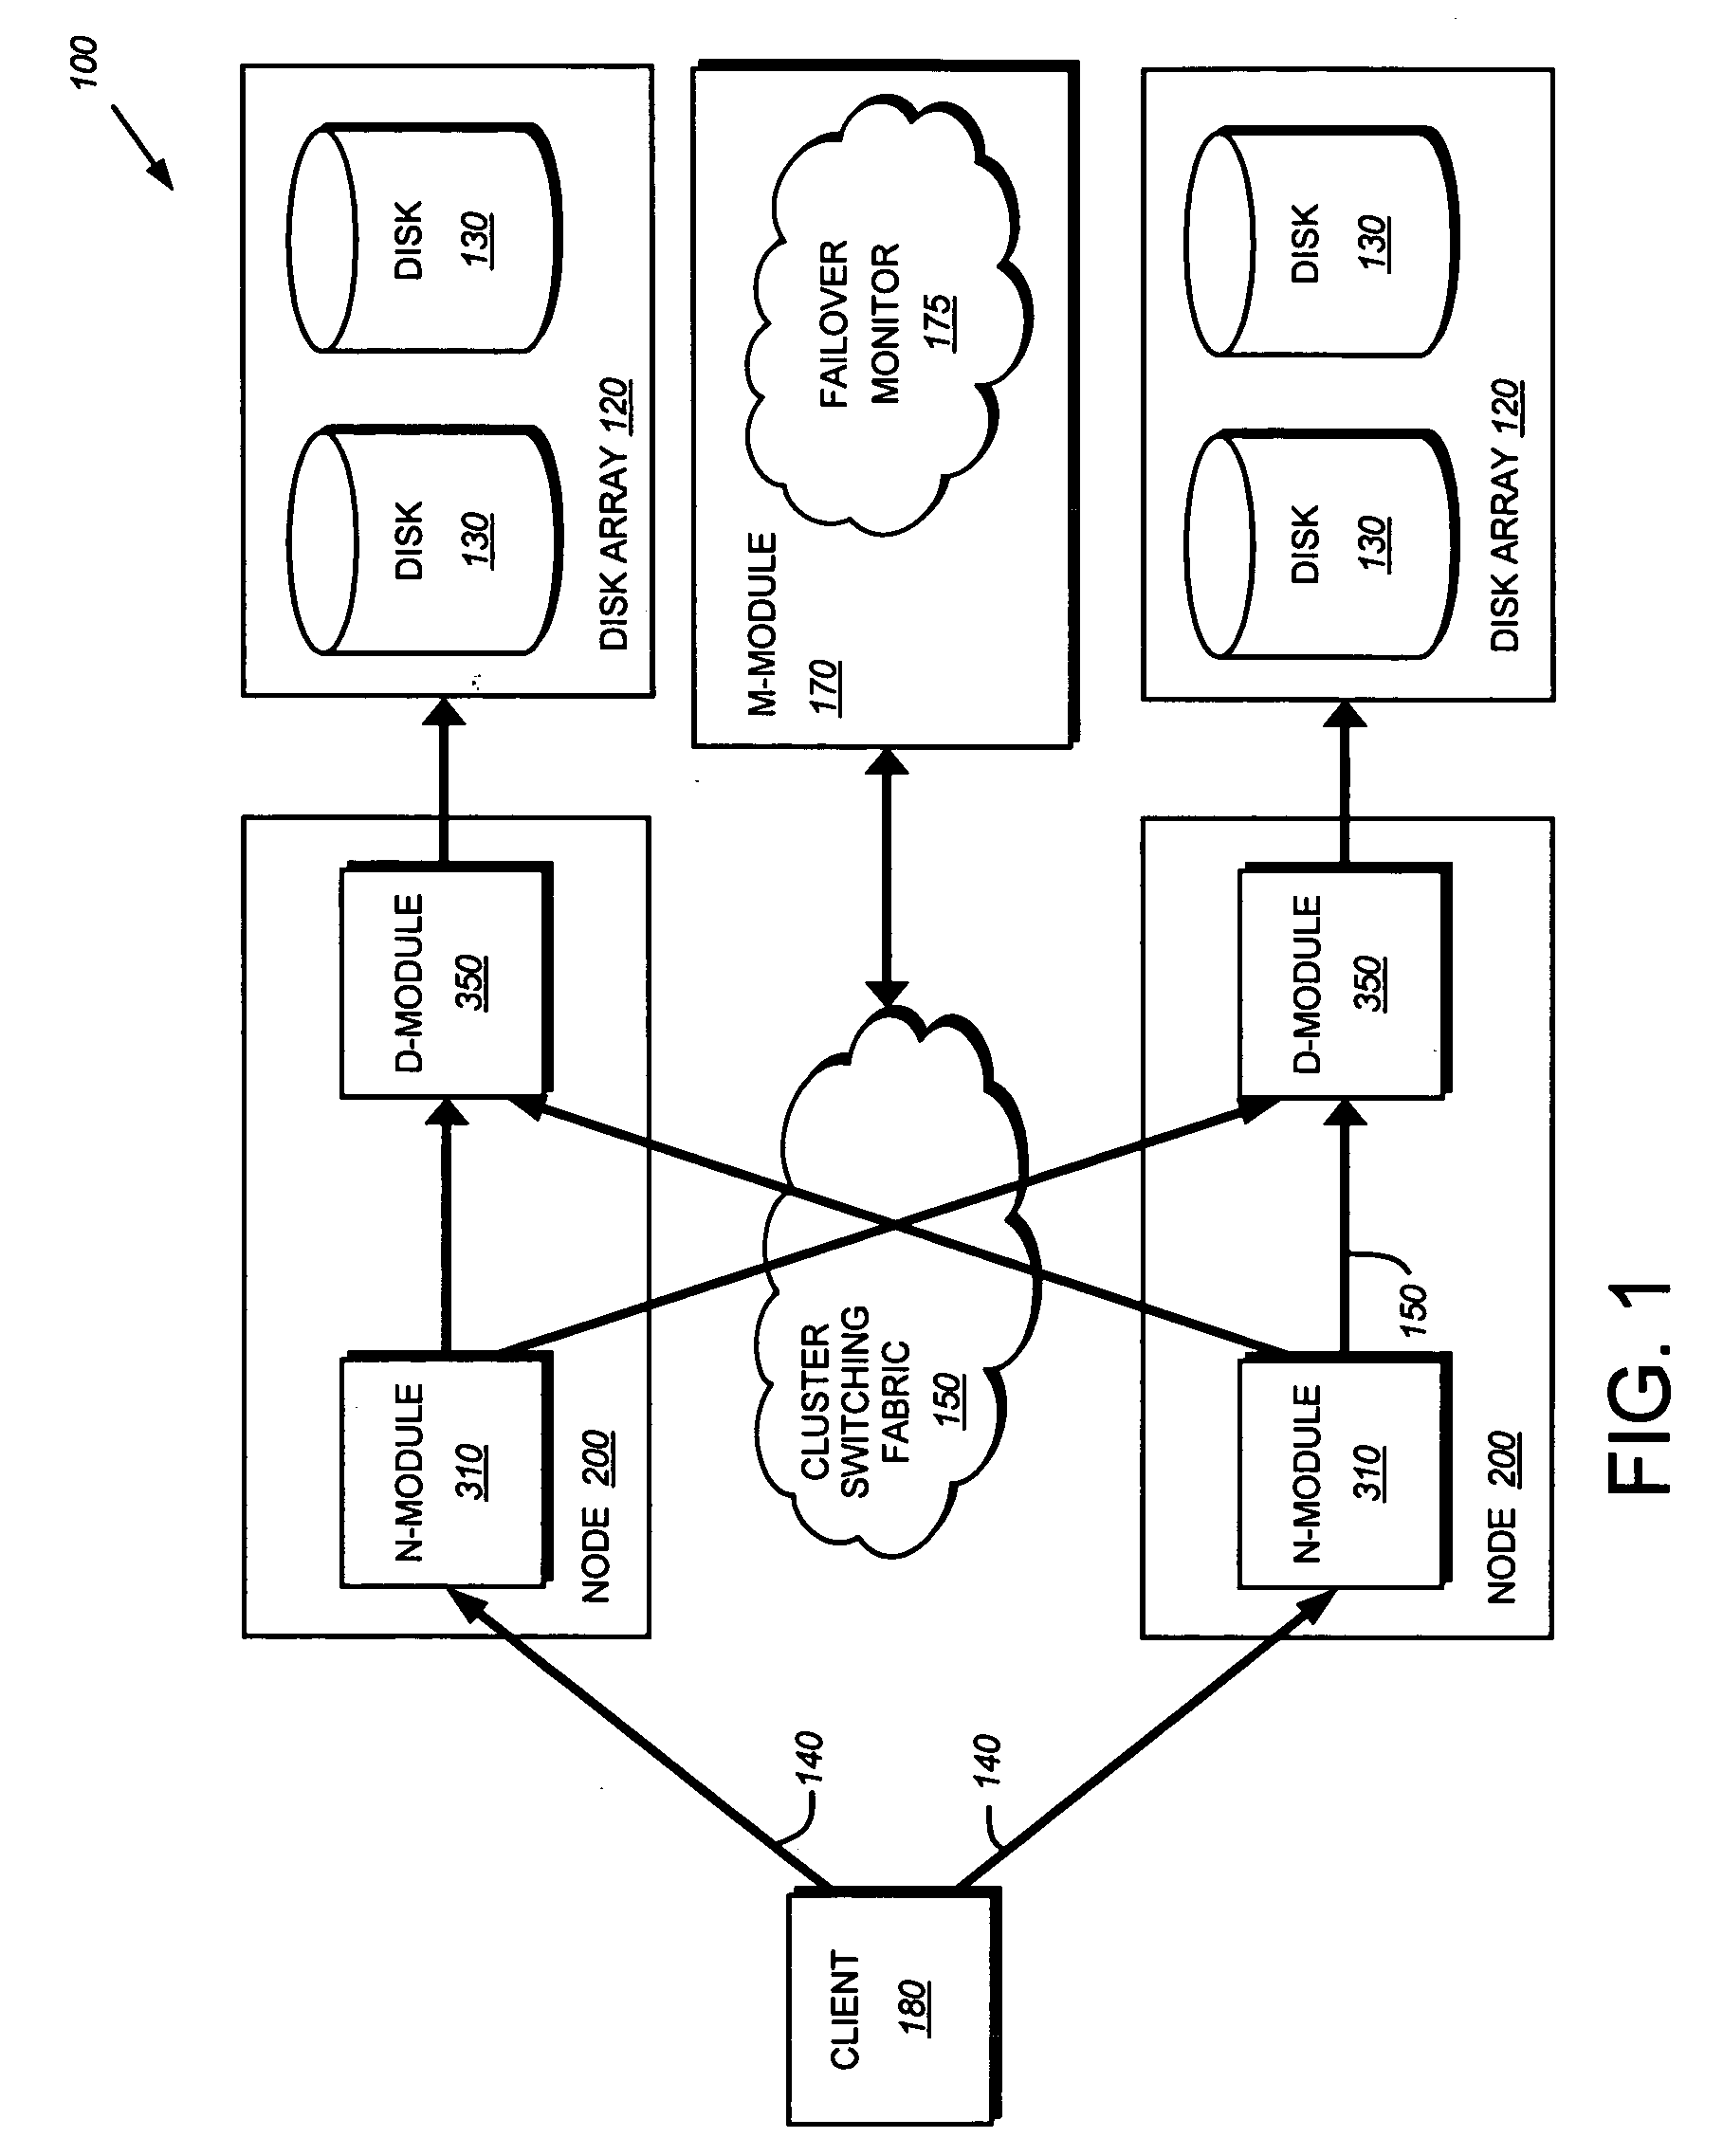 System and method for failover of iSCSI target portal groups in a cluster environment